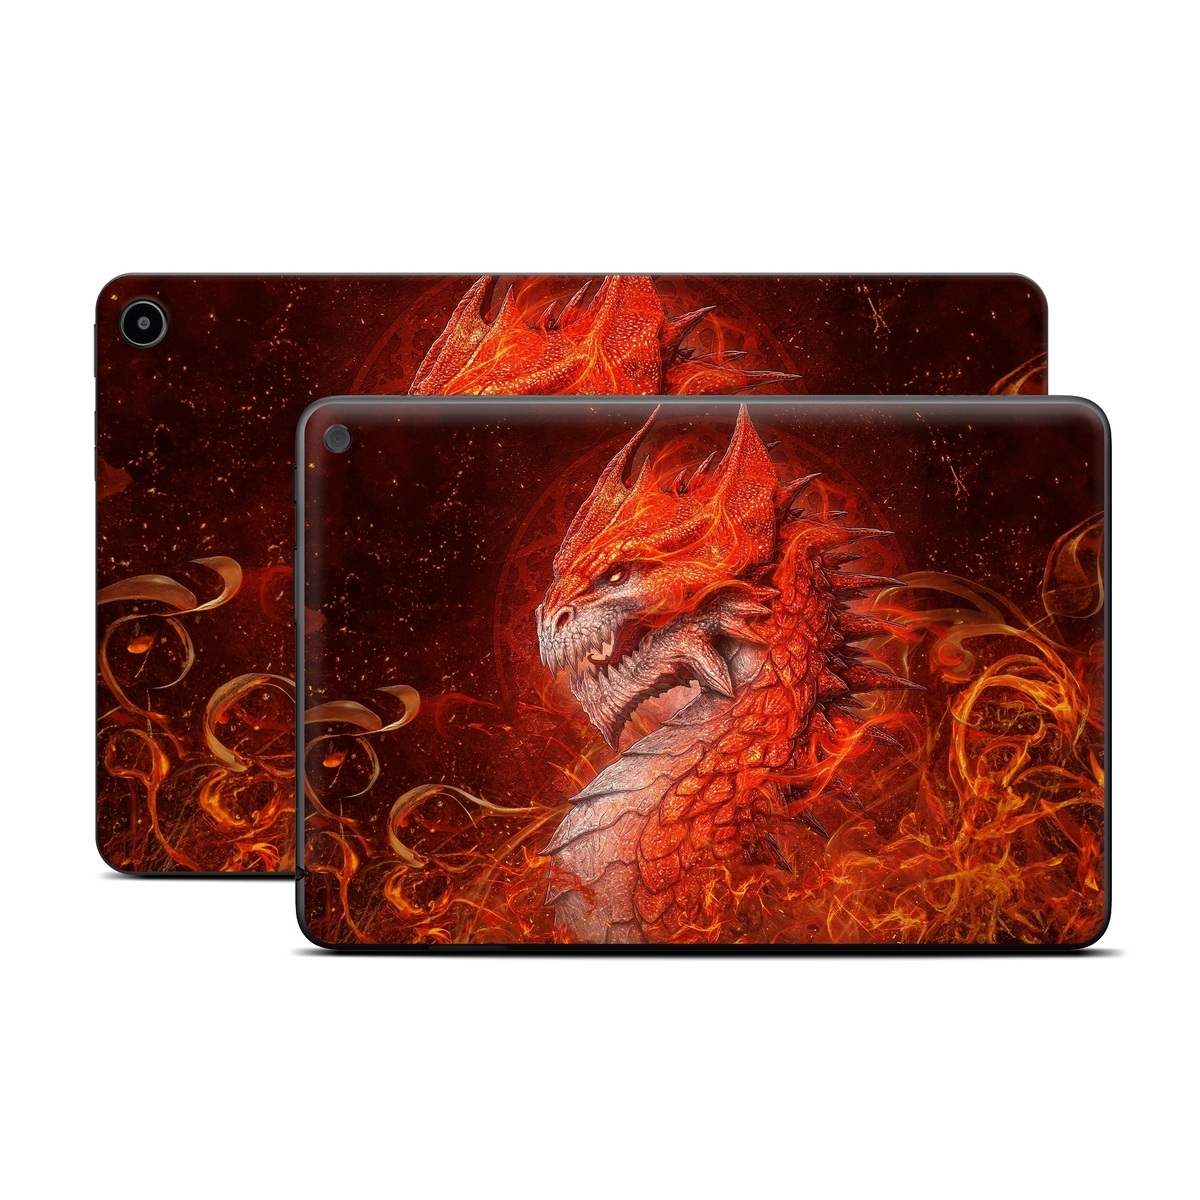 Amazon Fire Tablet Series Skin Skin design of Fictional character, Cg artwork, Illustration, Art, Demon, Geological phenomenon, Mythical creature, Dragon, Cryptid, with red, orange, yellow colors